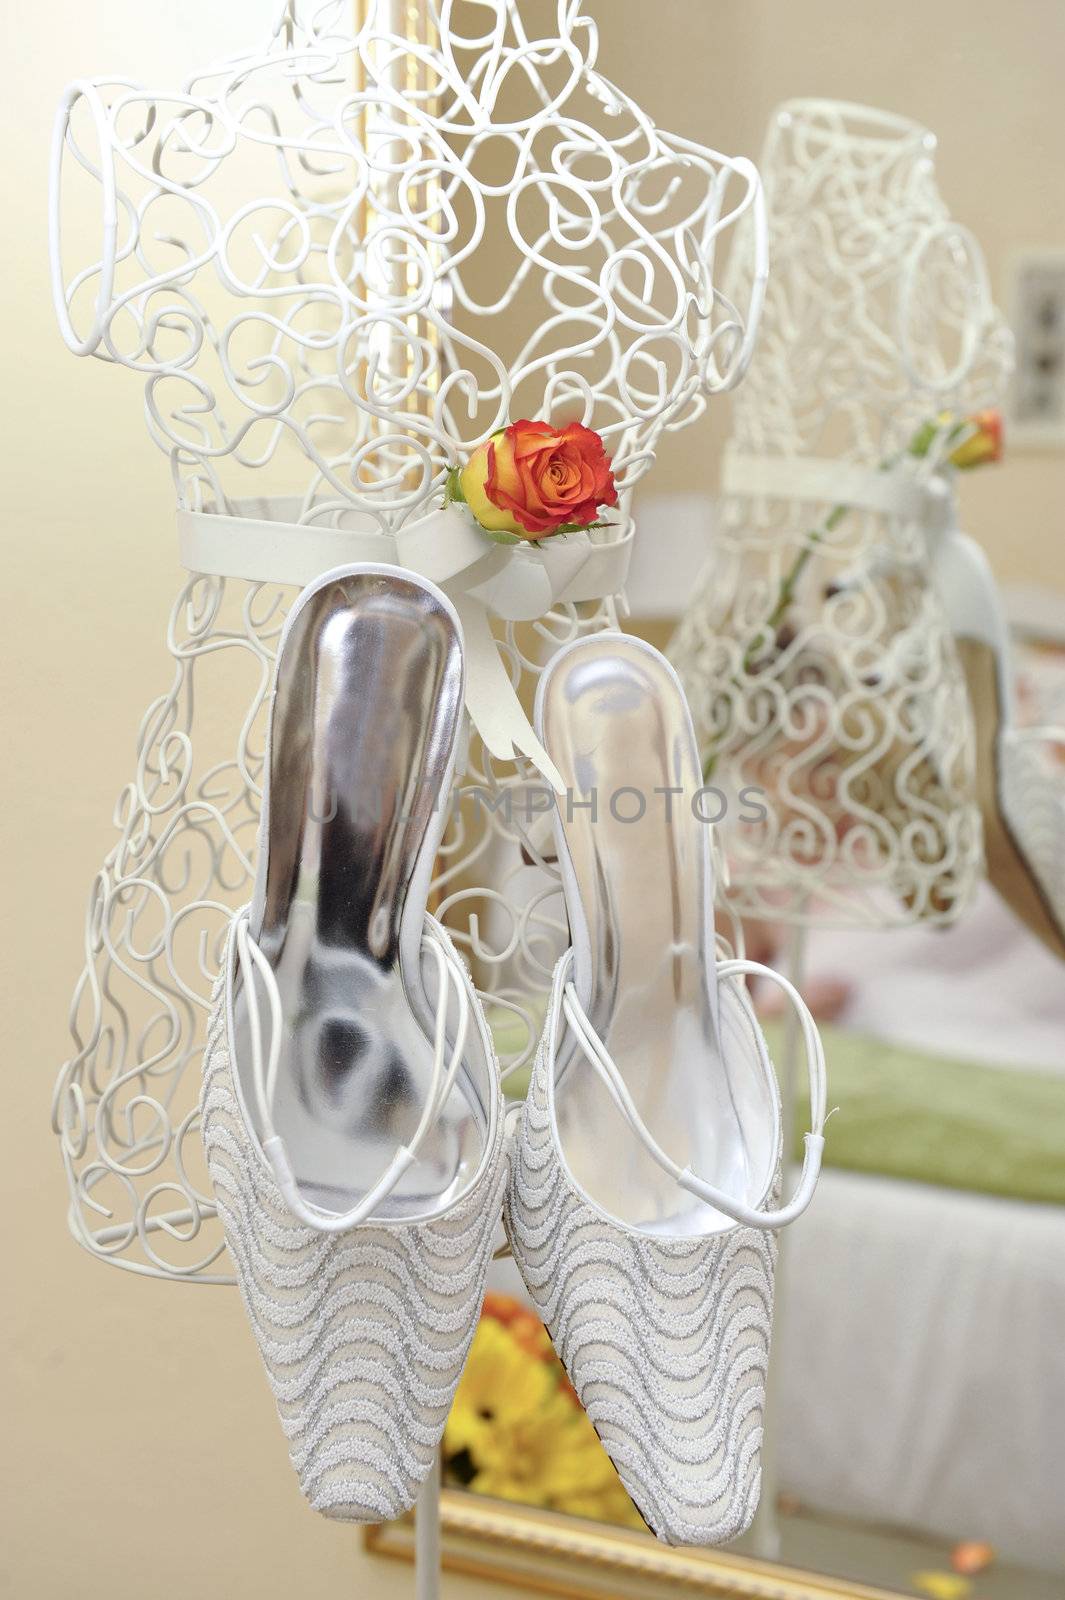 white wedding shoes hanging in front of a mirror on white frame